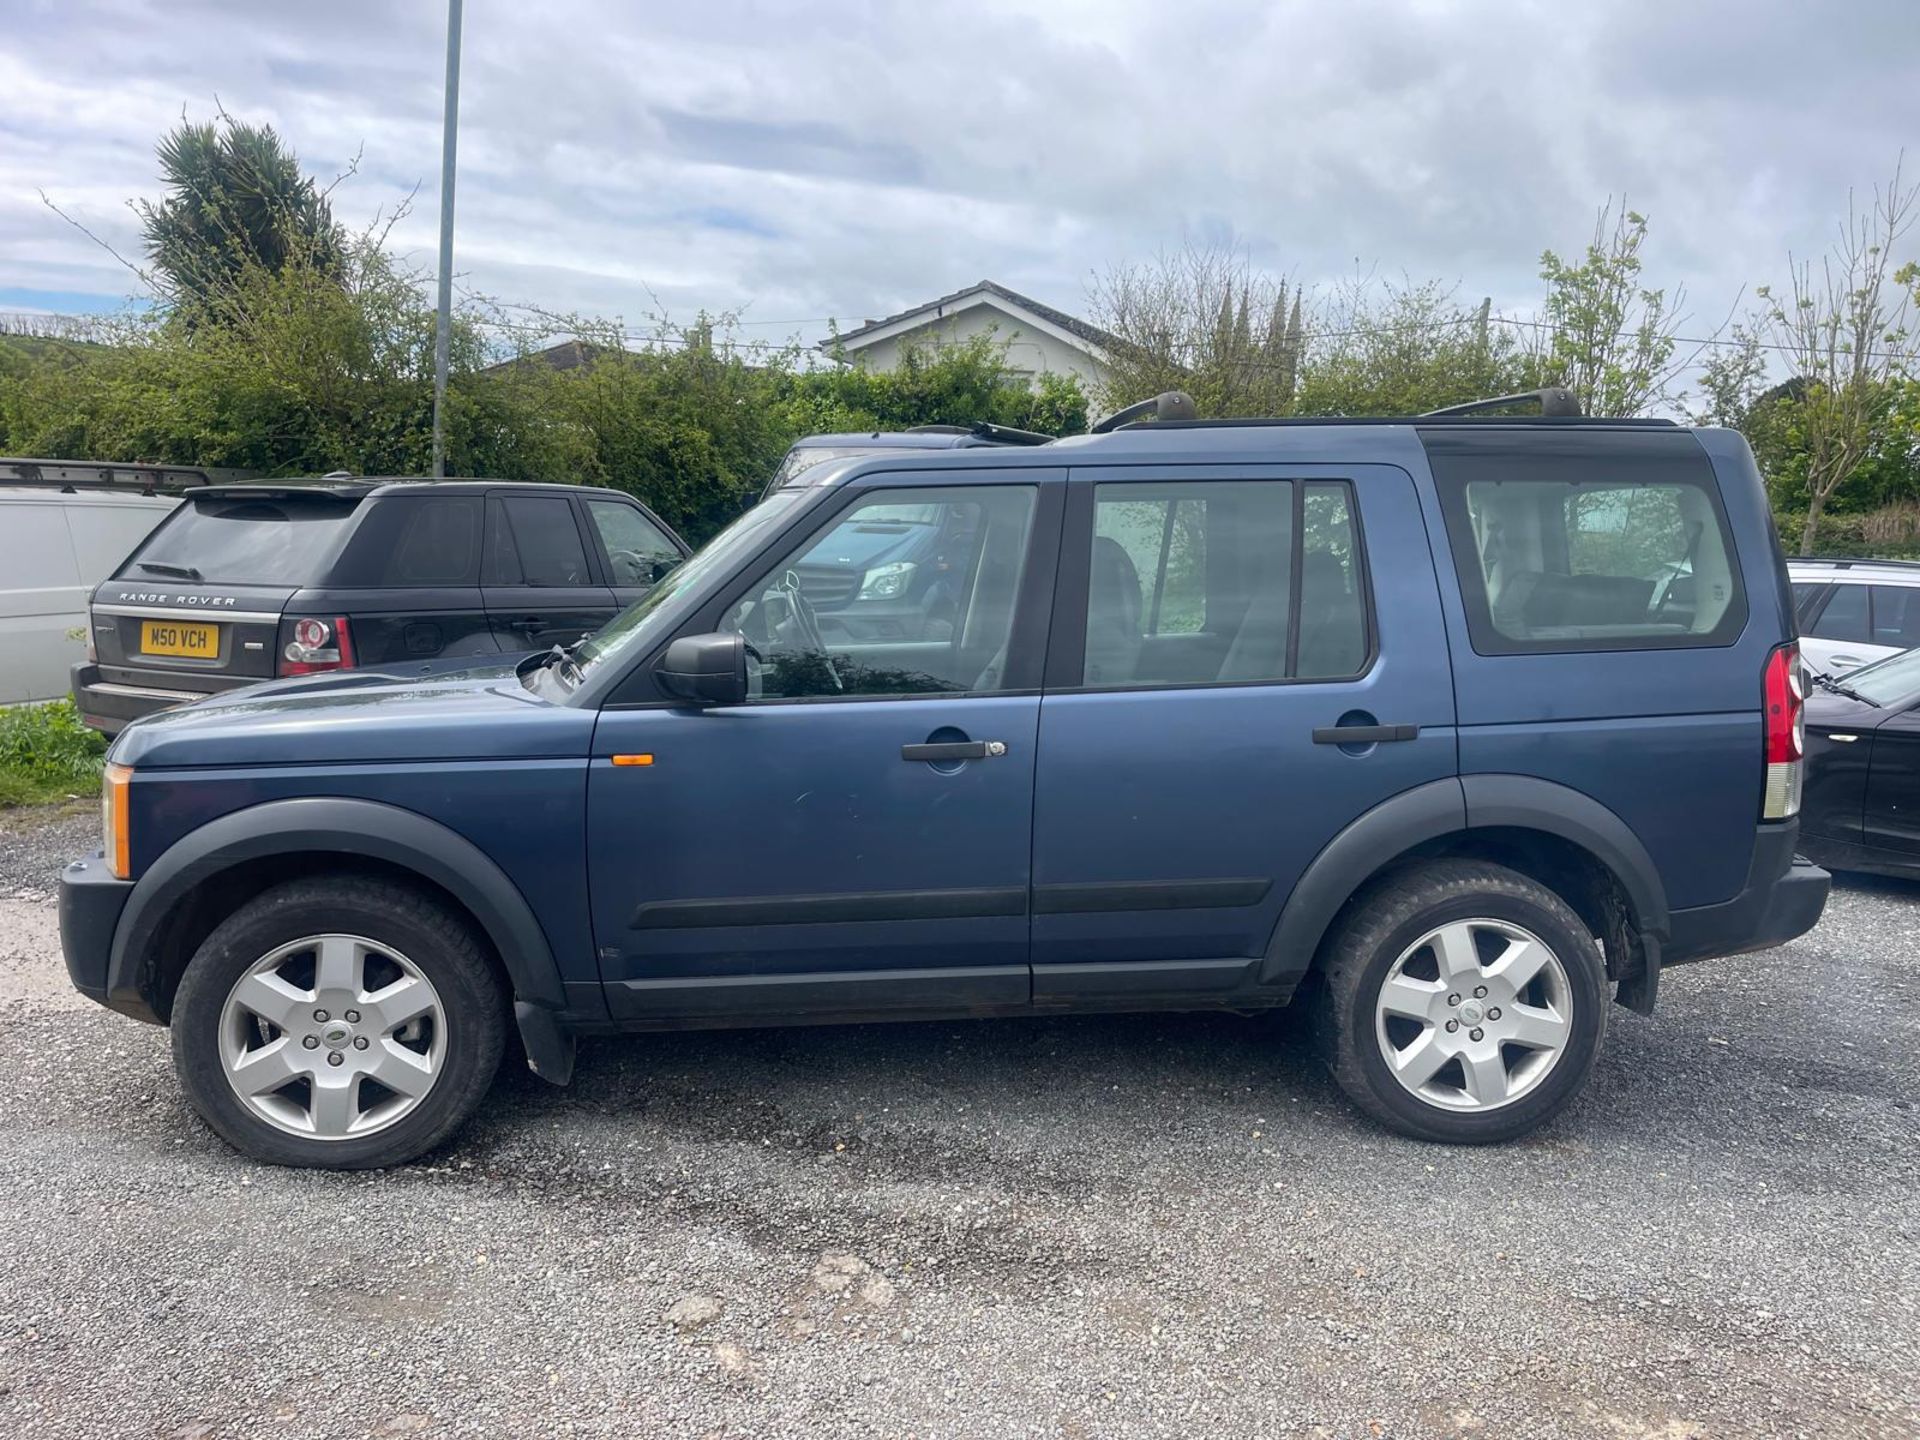 2005 Land Rover Discovery 3 Tdv6 S Auto - No Reserve - Image 7 of 14